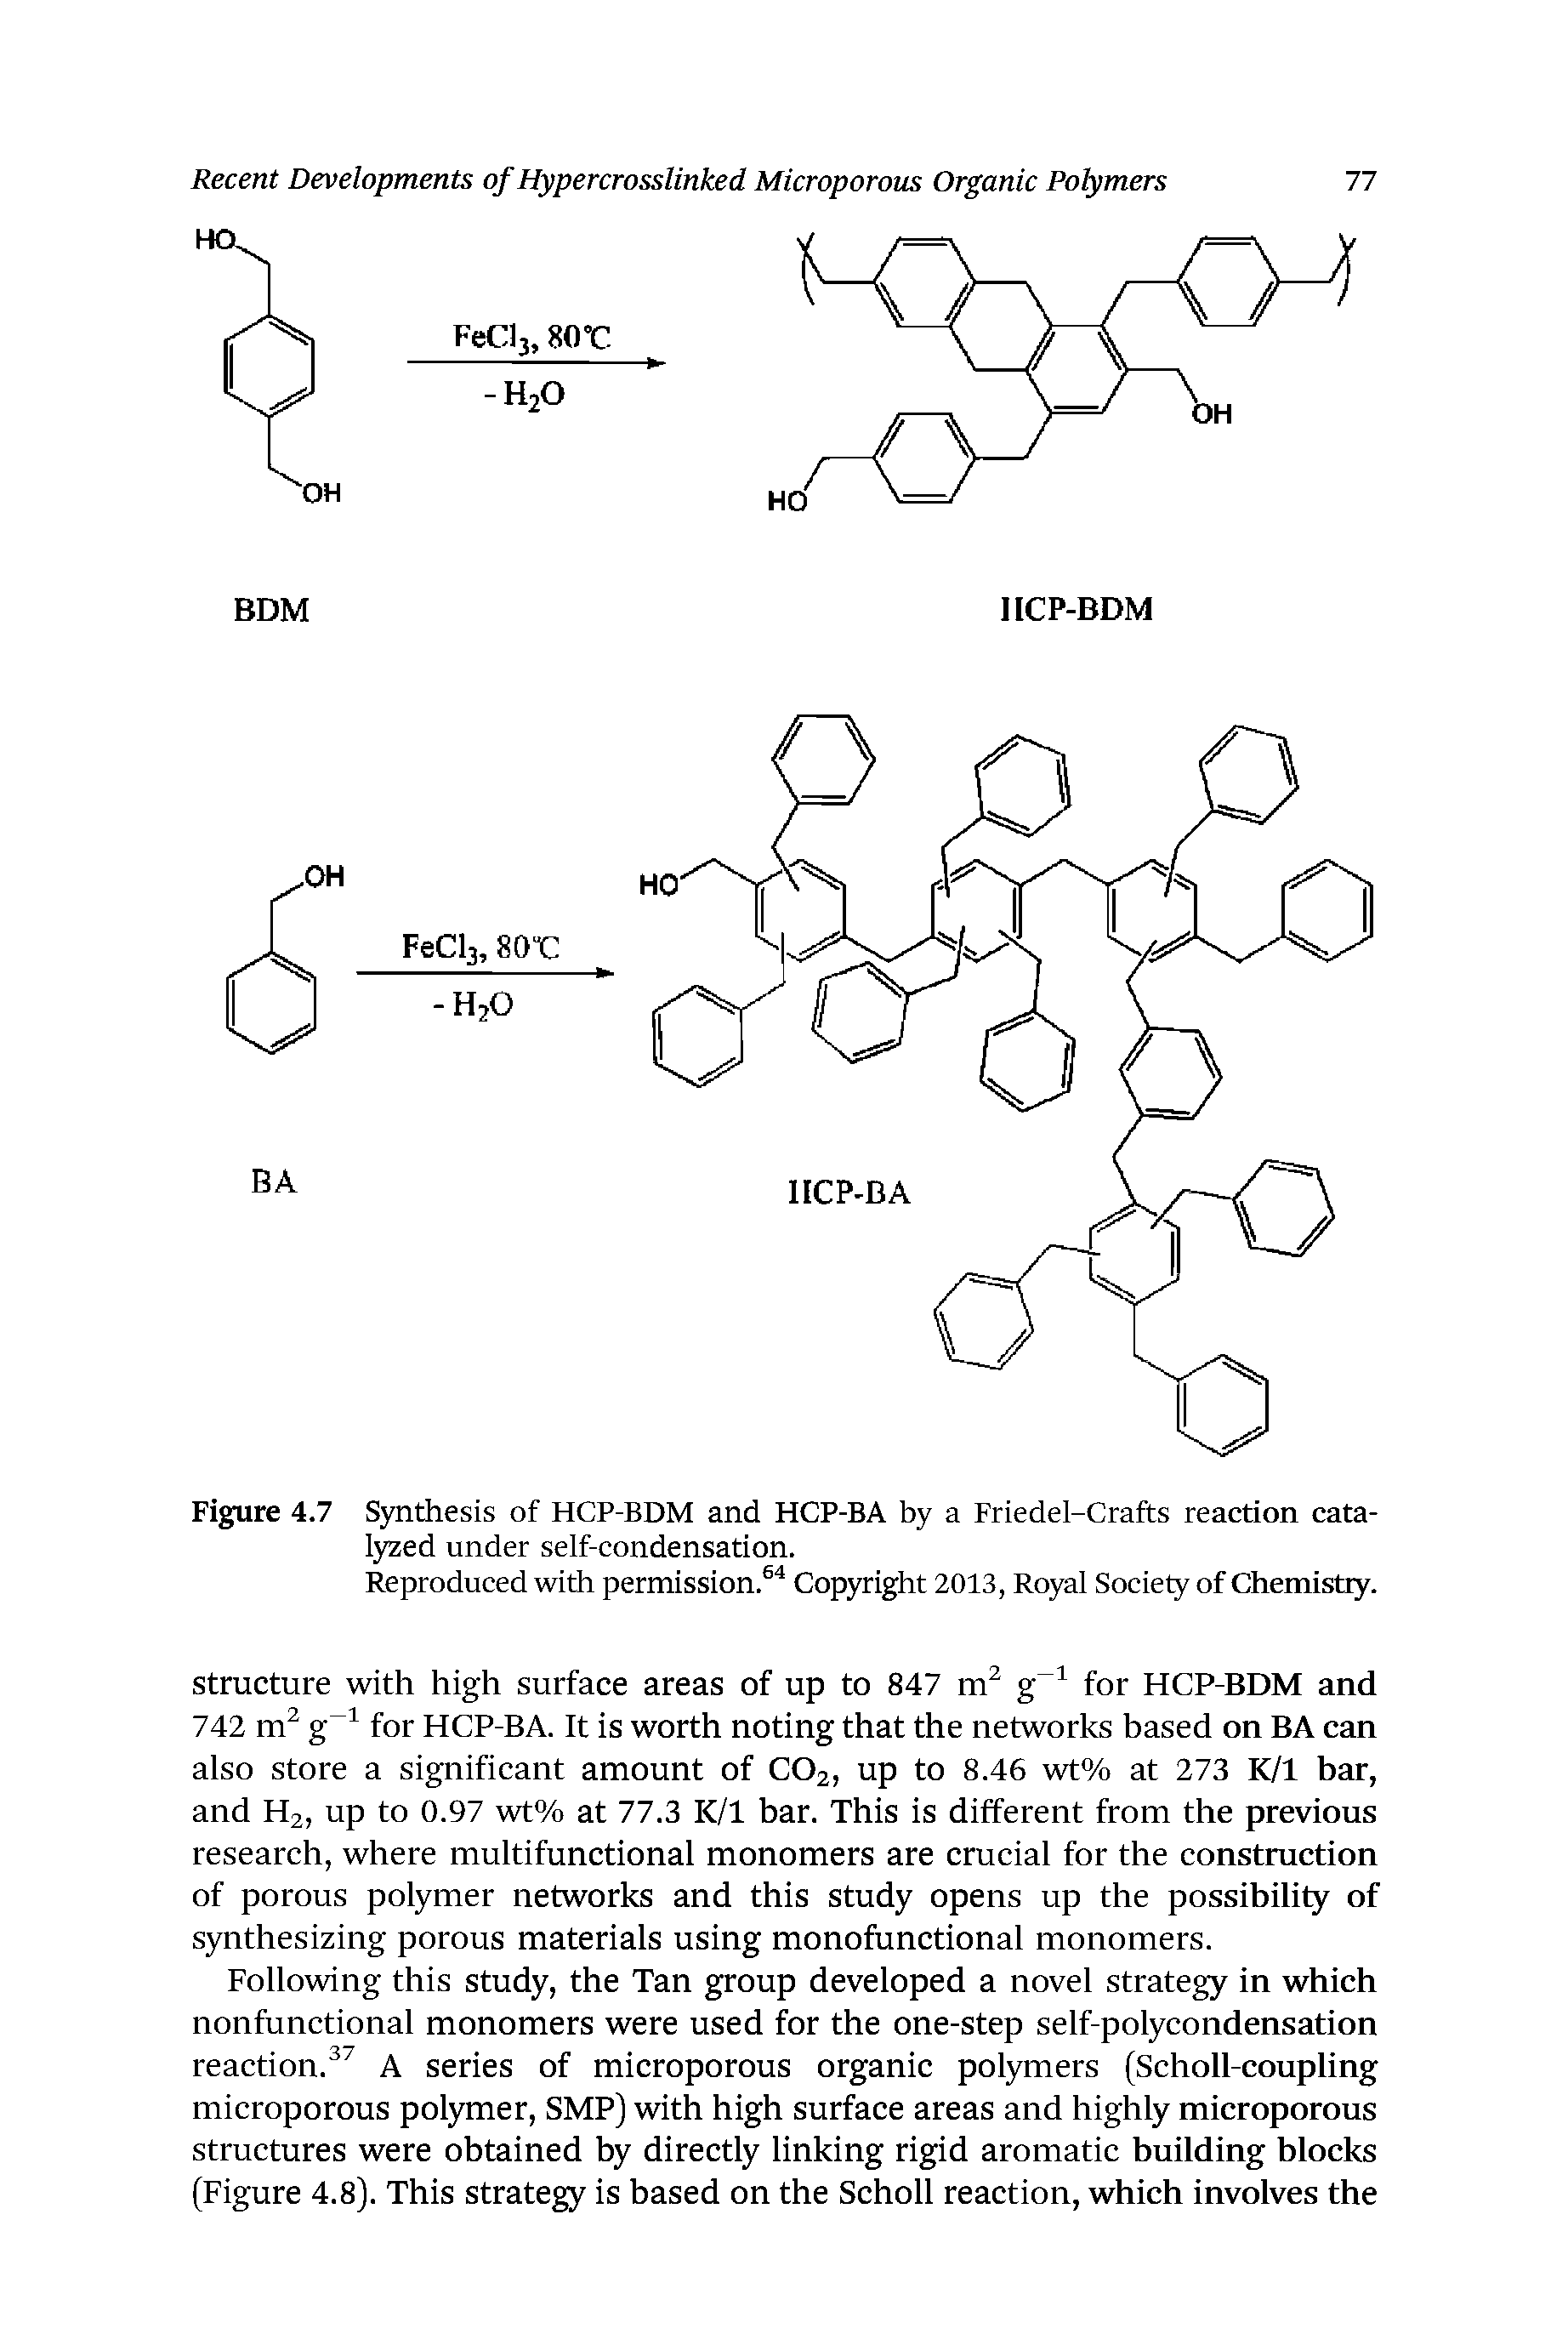 Figure 4.7 S3Tithesis of HCP-BDM and HCP-BA by a Friedel-Crafts reaction cata-l5 ed under self-condensation.